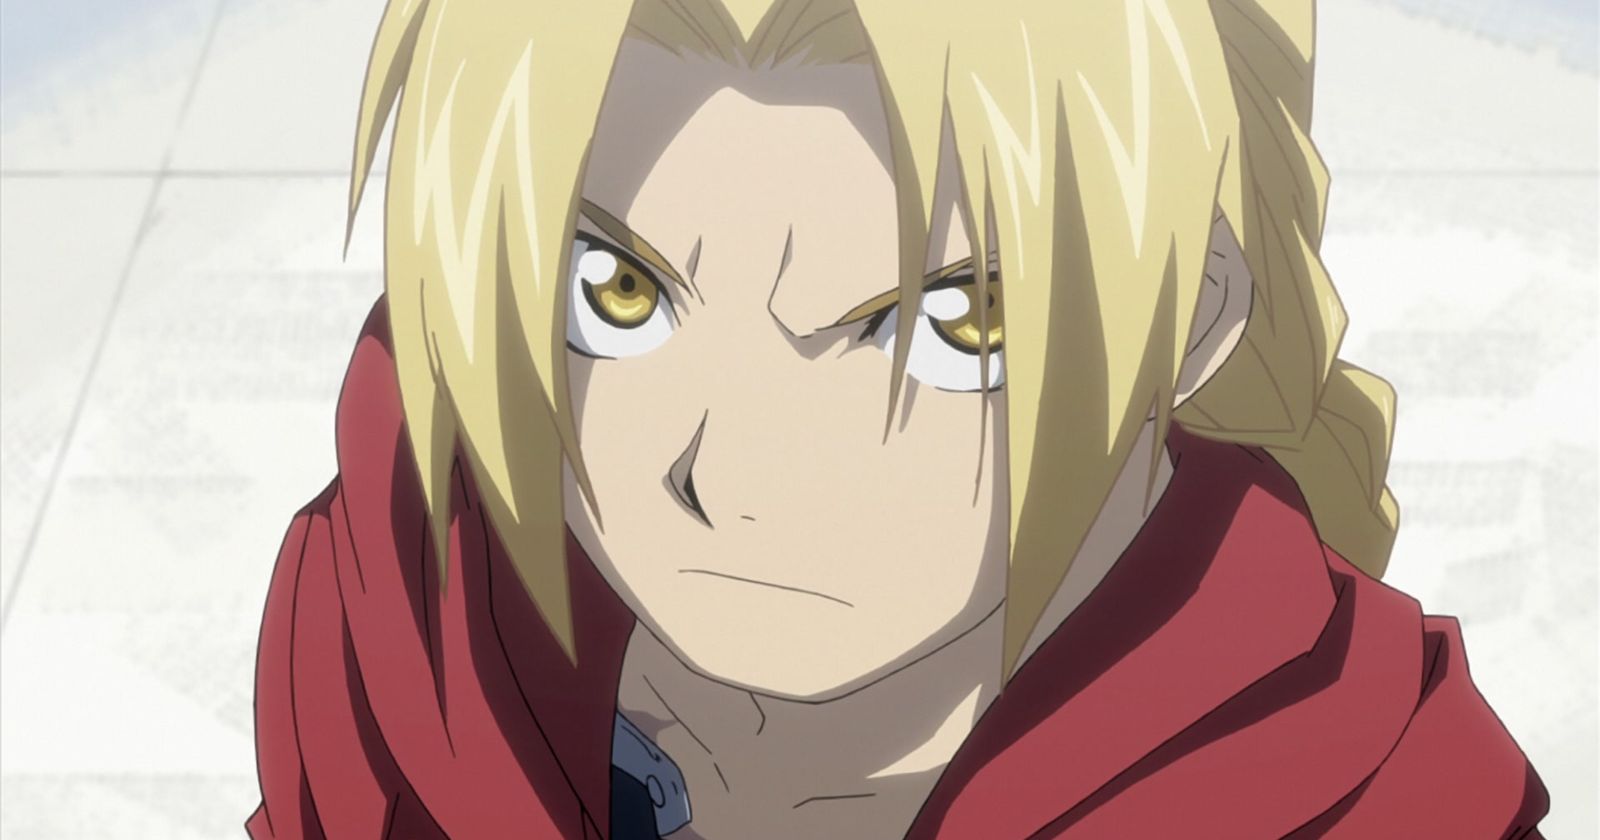 Do you need to watch Full Metal Alchemist first before watching